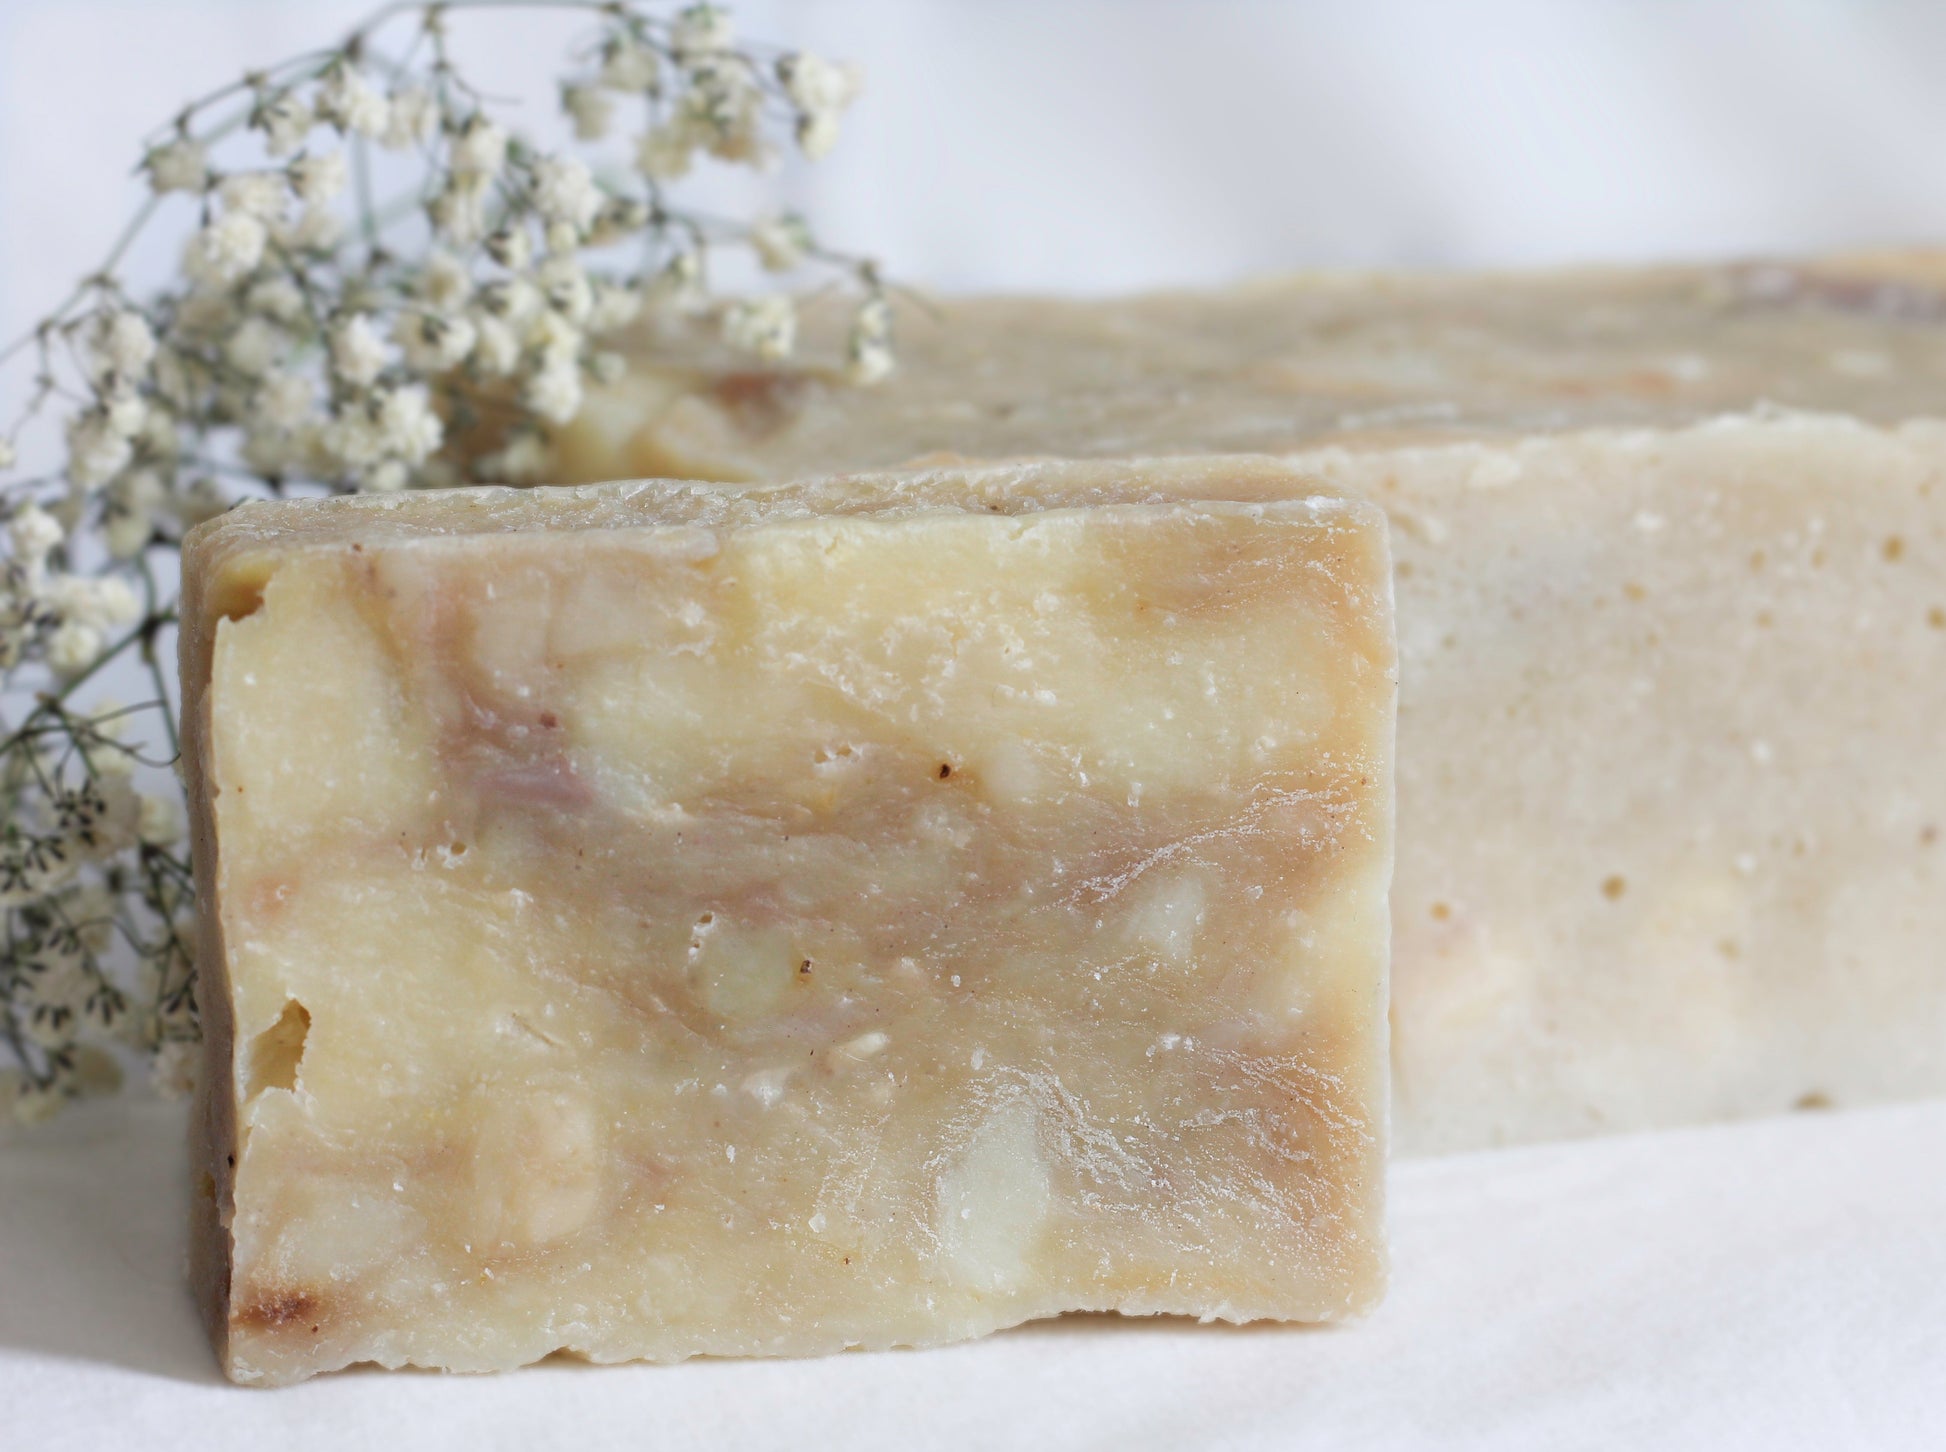 bar of soap in front of a loaf of soap and small white dried flowers on a white background